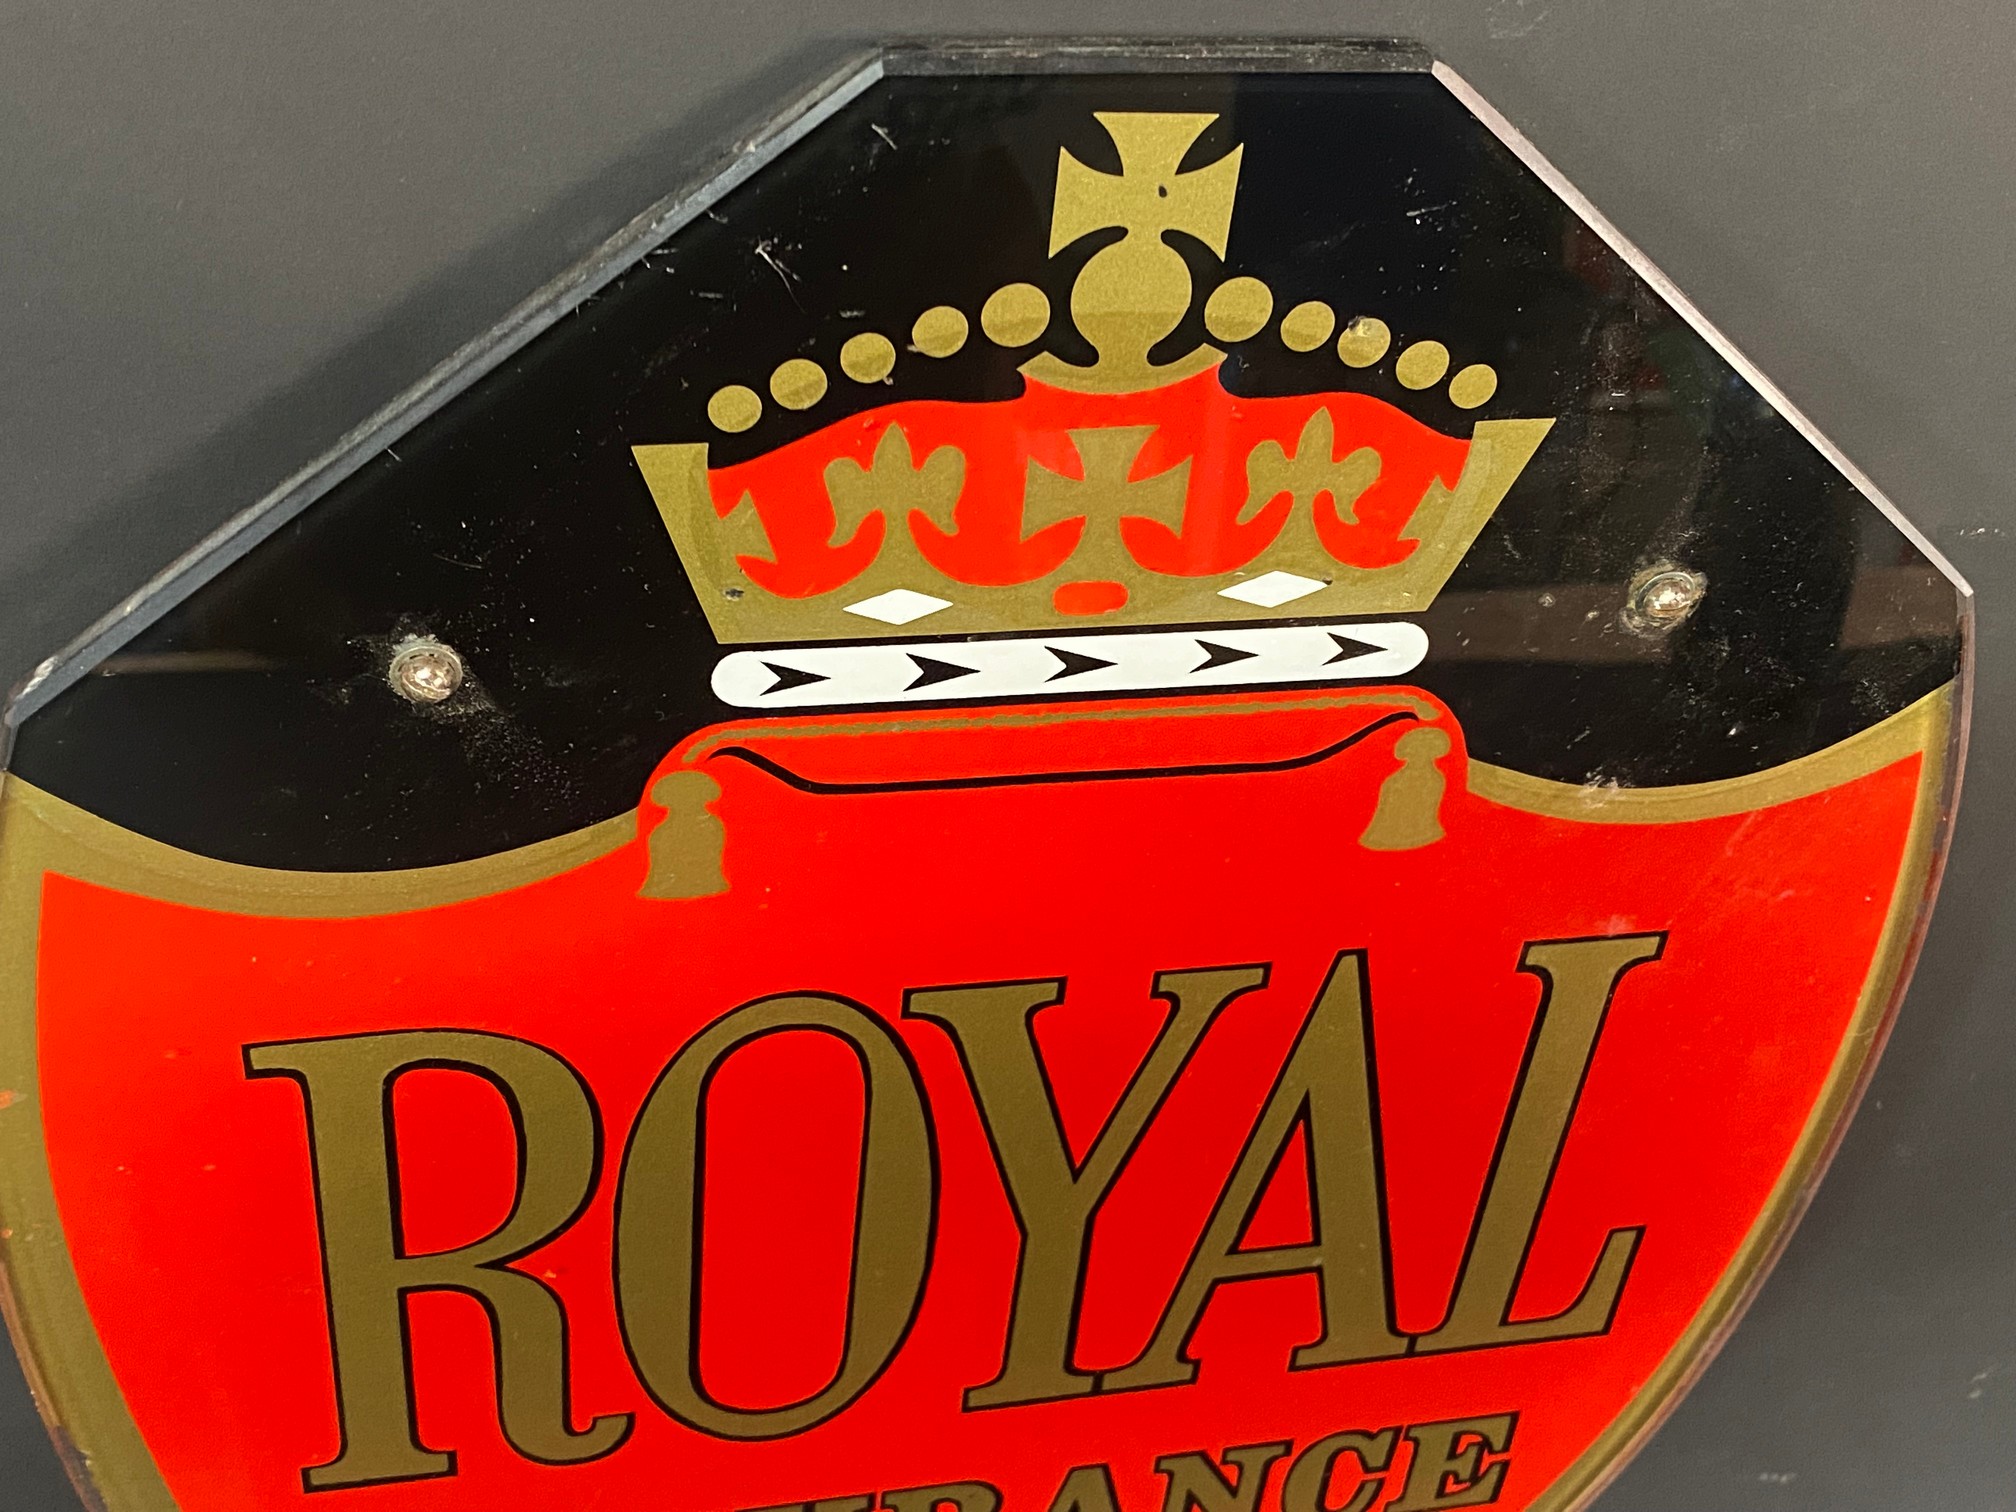 A Royal Insurance shield shaped glass advertising sign, 12 x 17". - Image 2 of 3